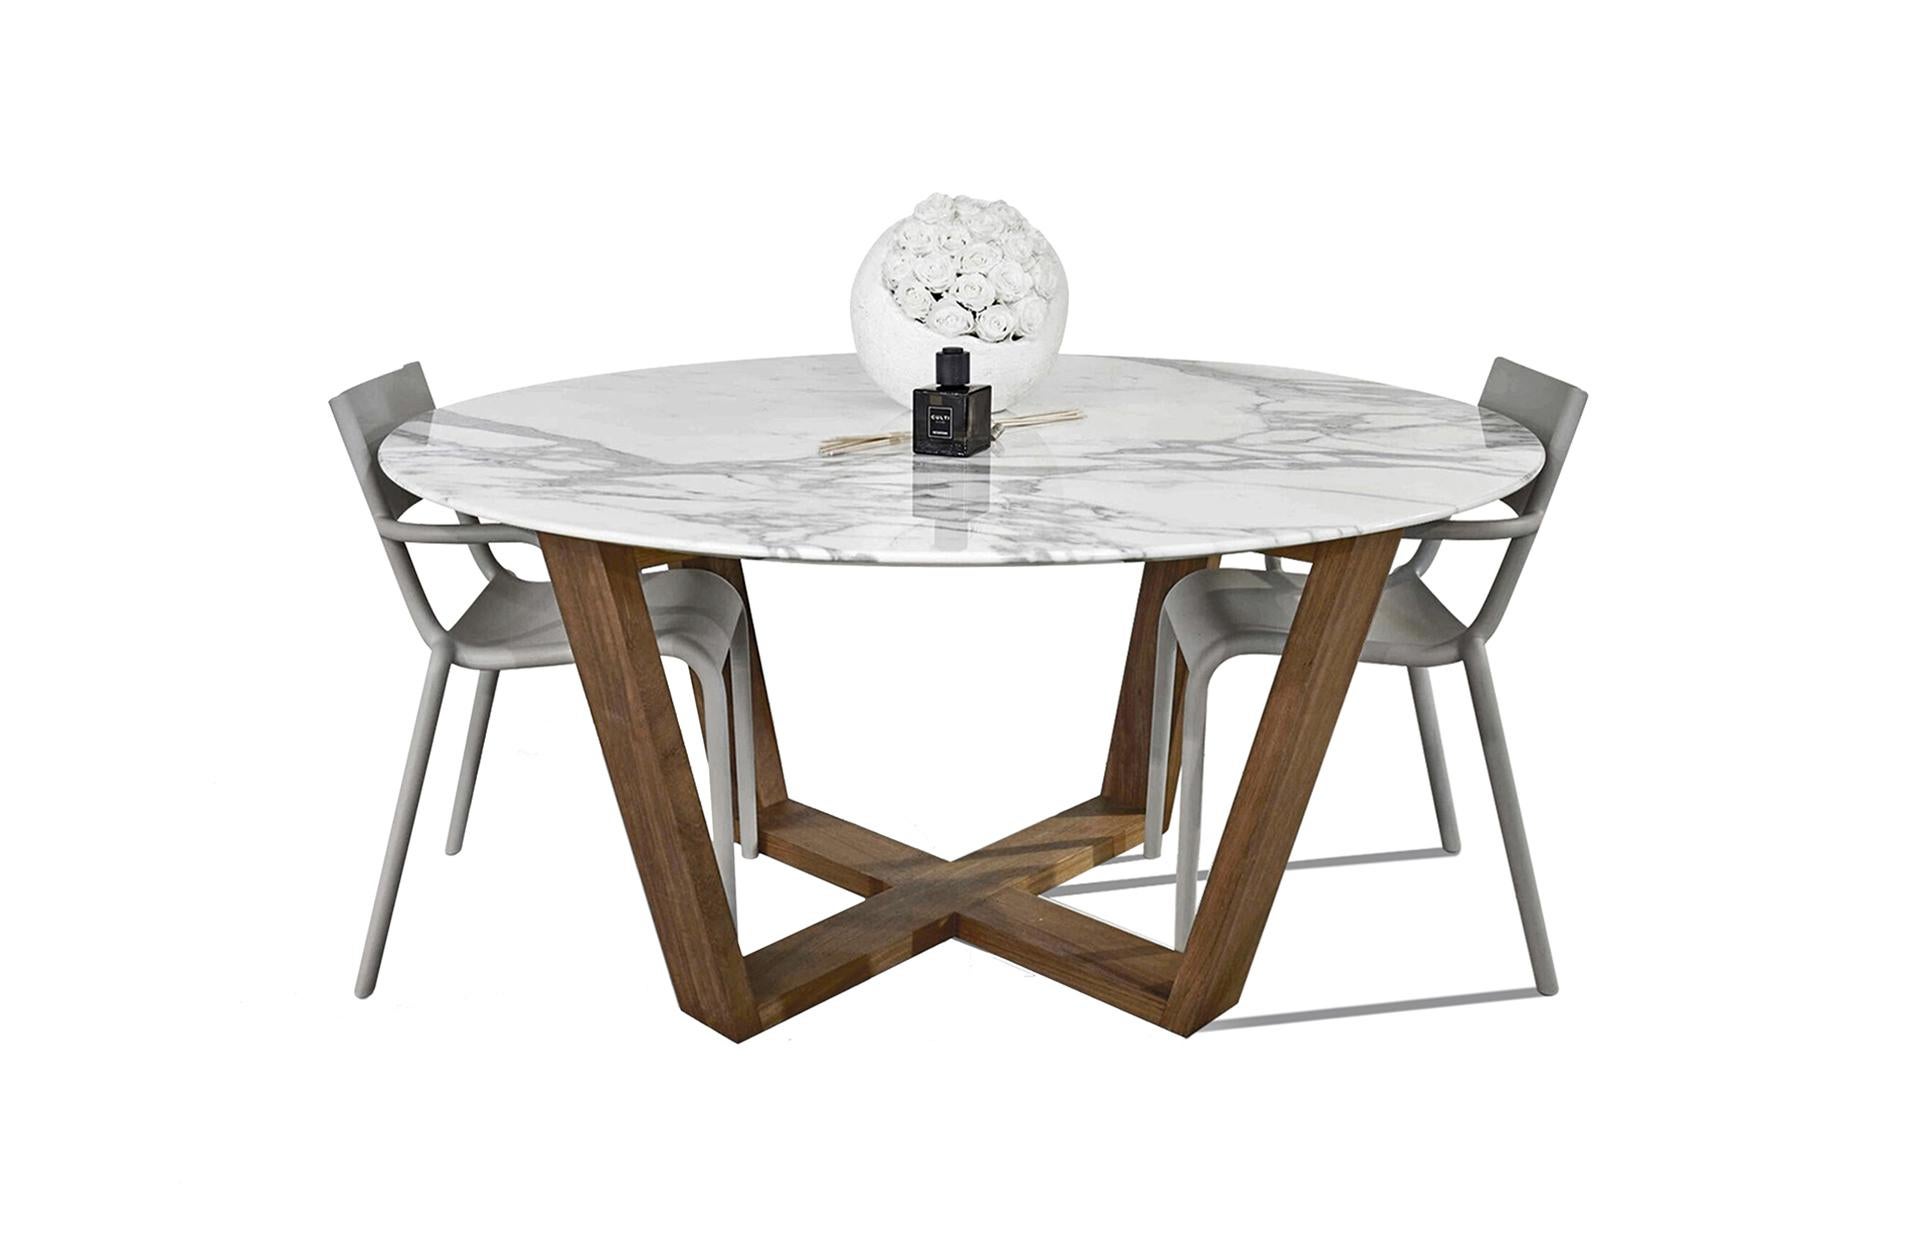 Italian 21st Century White Carrara Marble Teakwood Round Basket Outdoor Dining Table For Sale